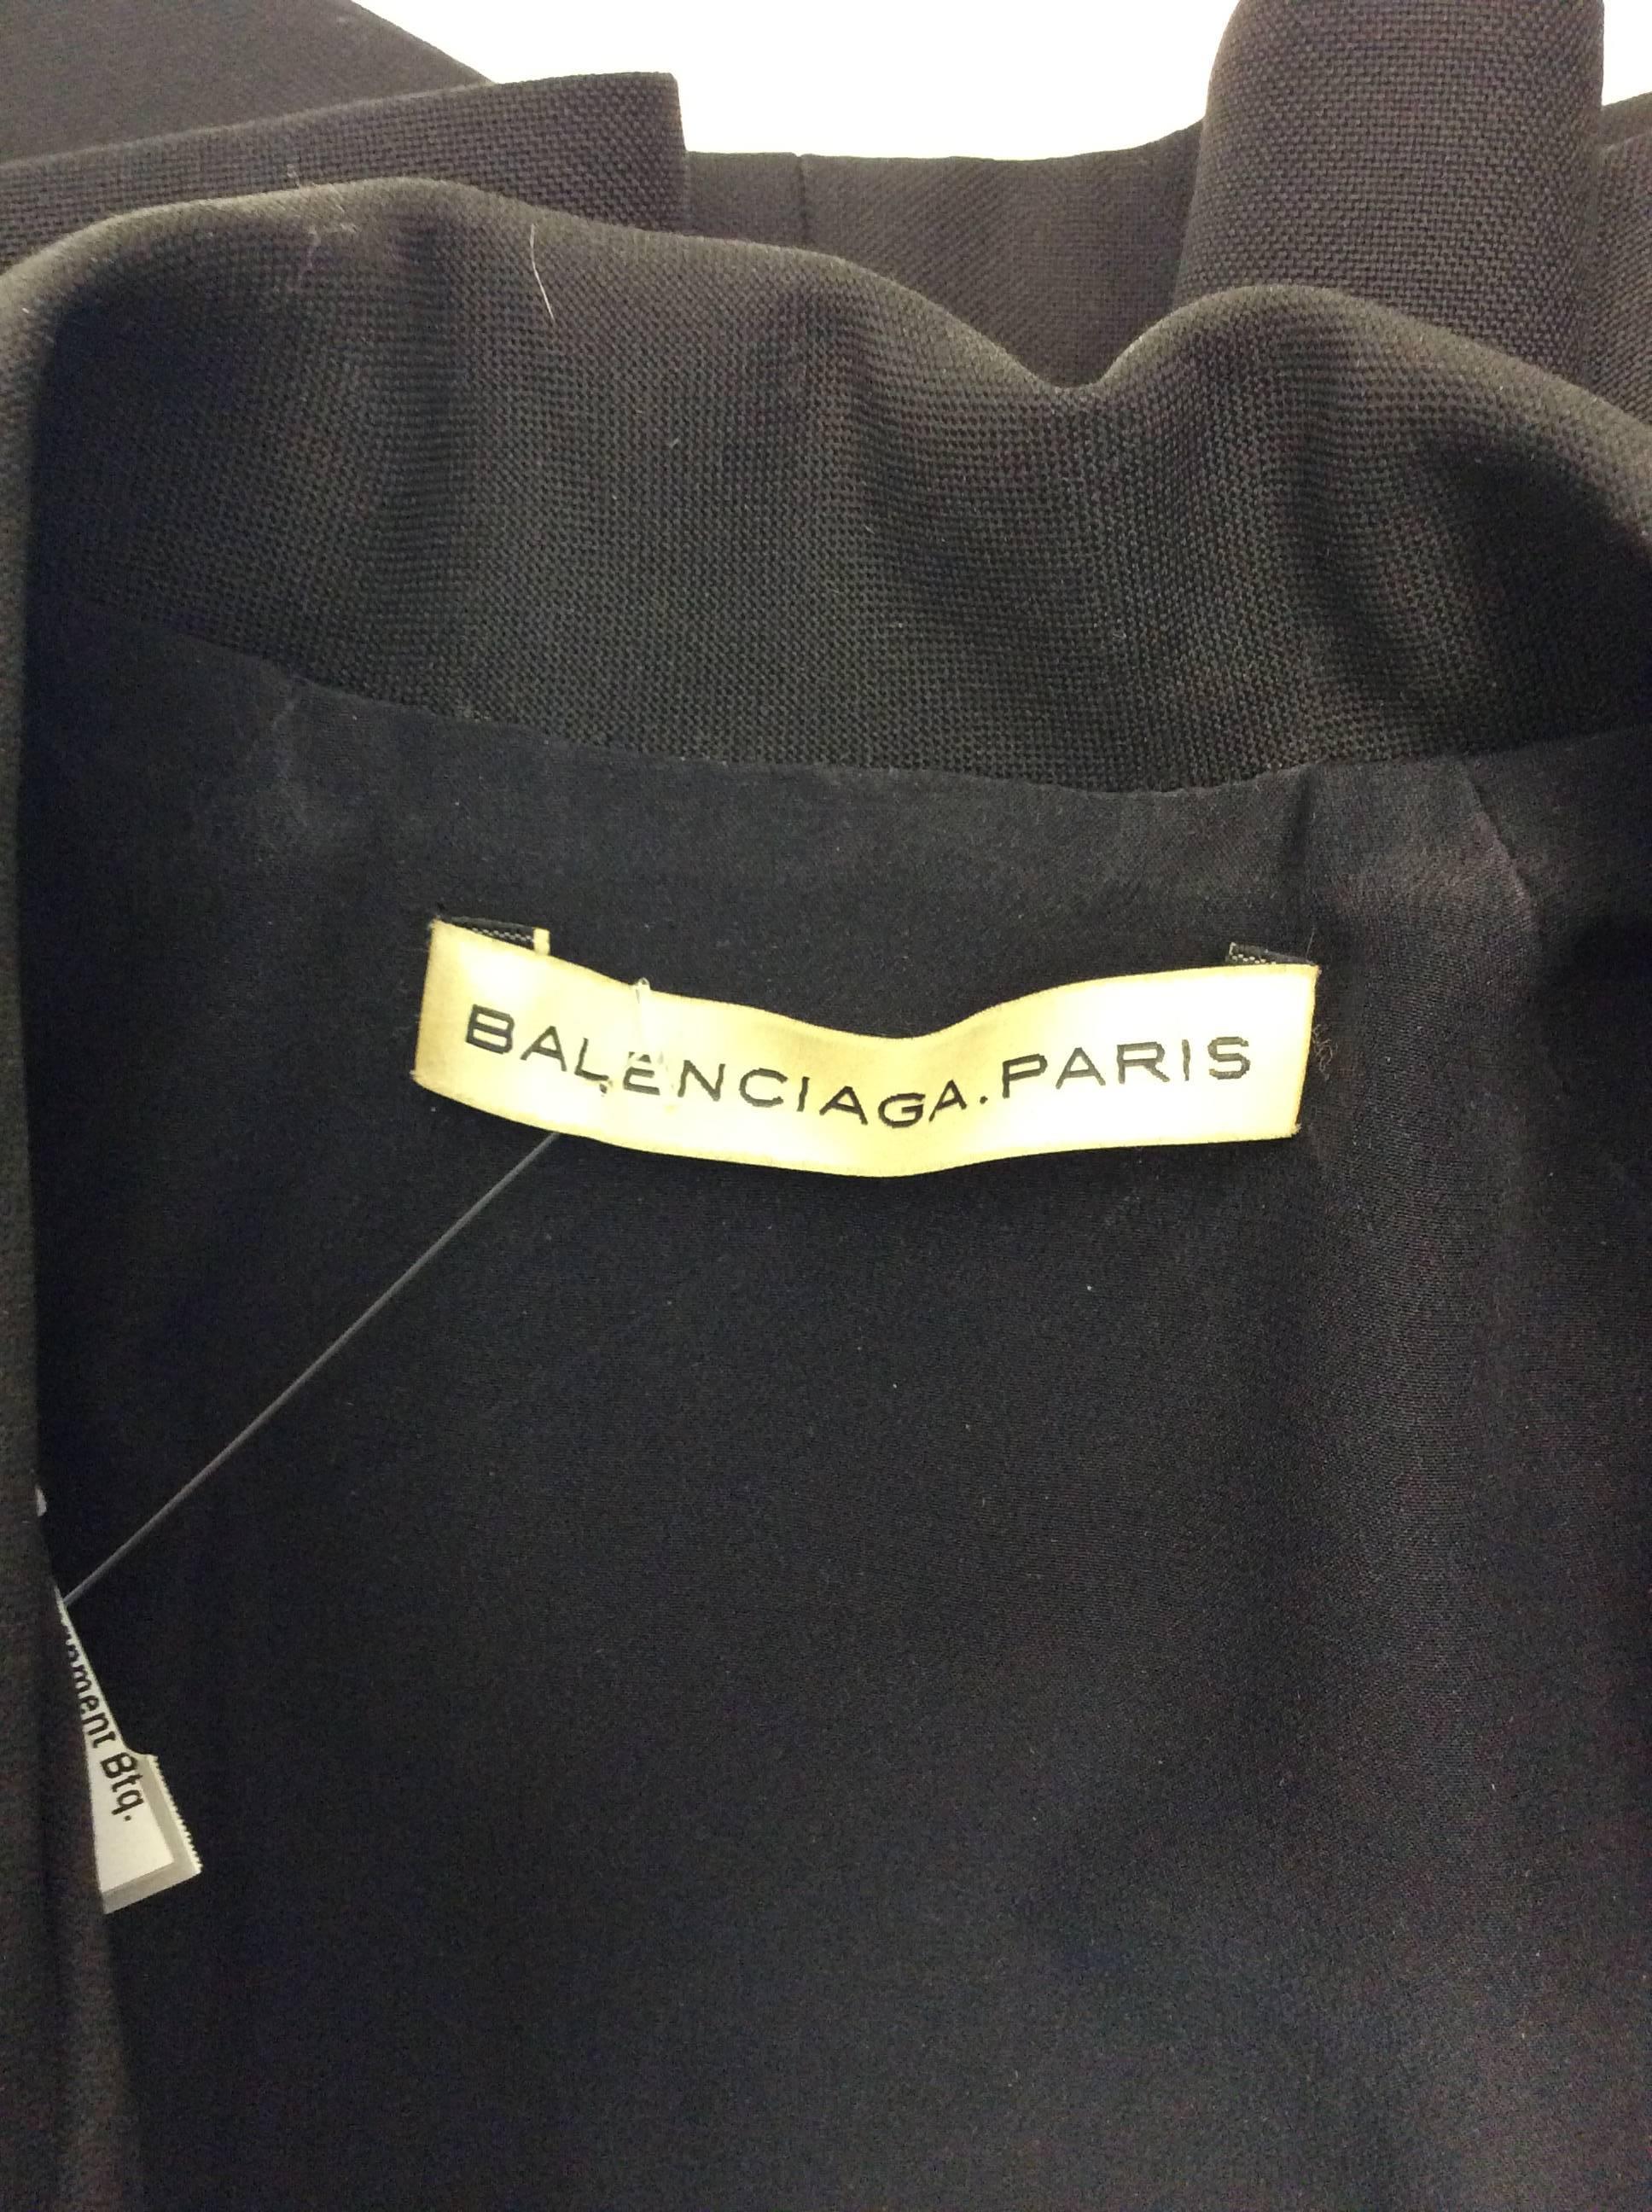 Balenciaga Black Skirt Suit with Peplum Detail For Sale 2